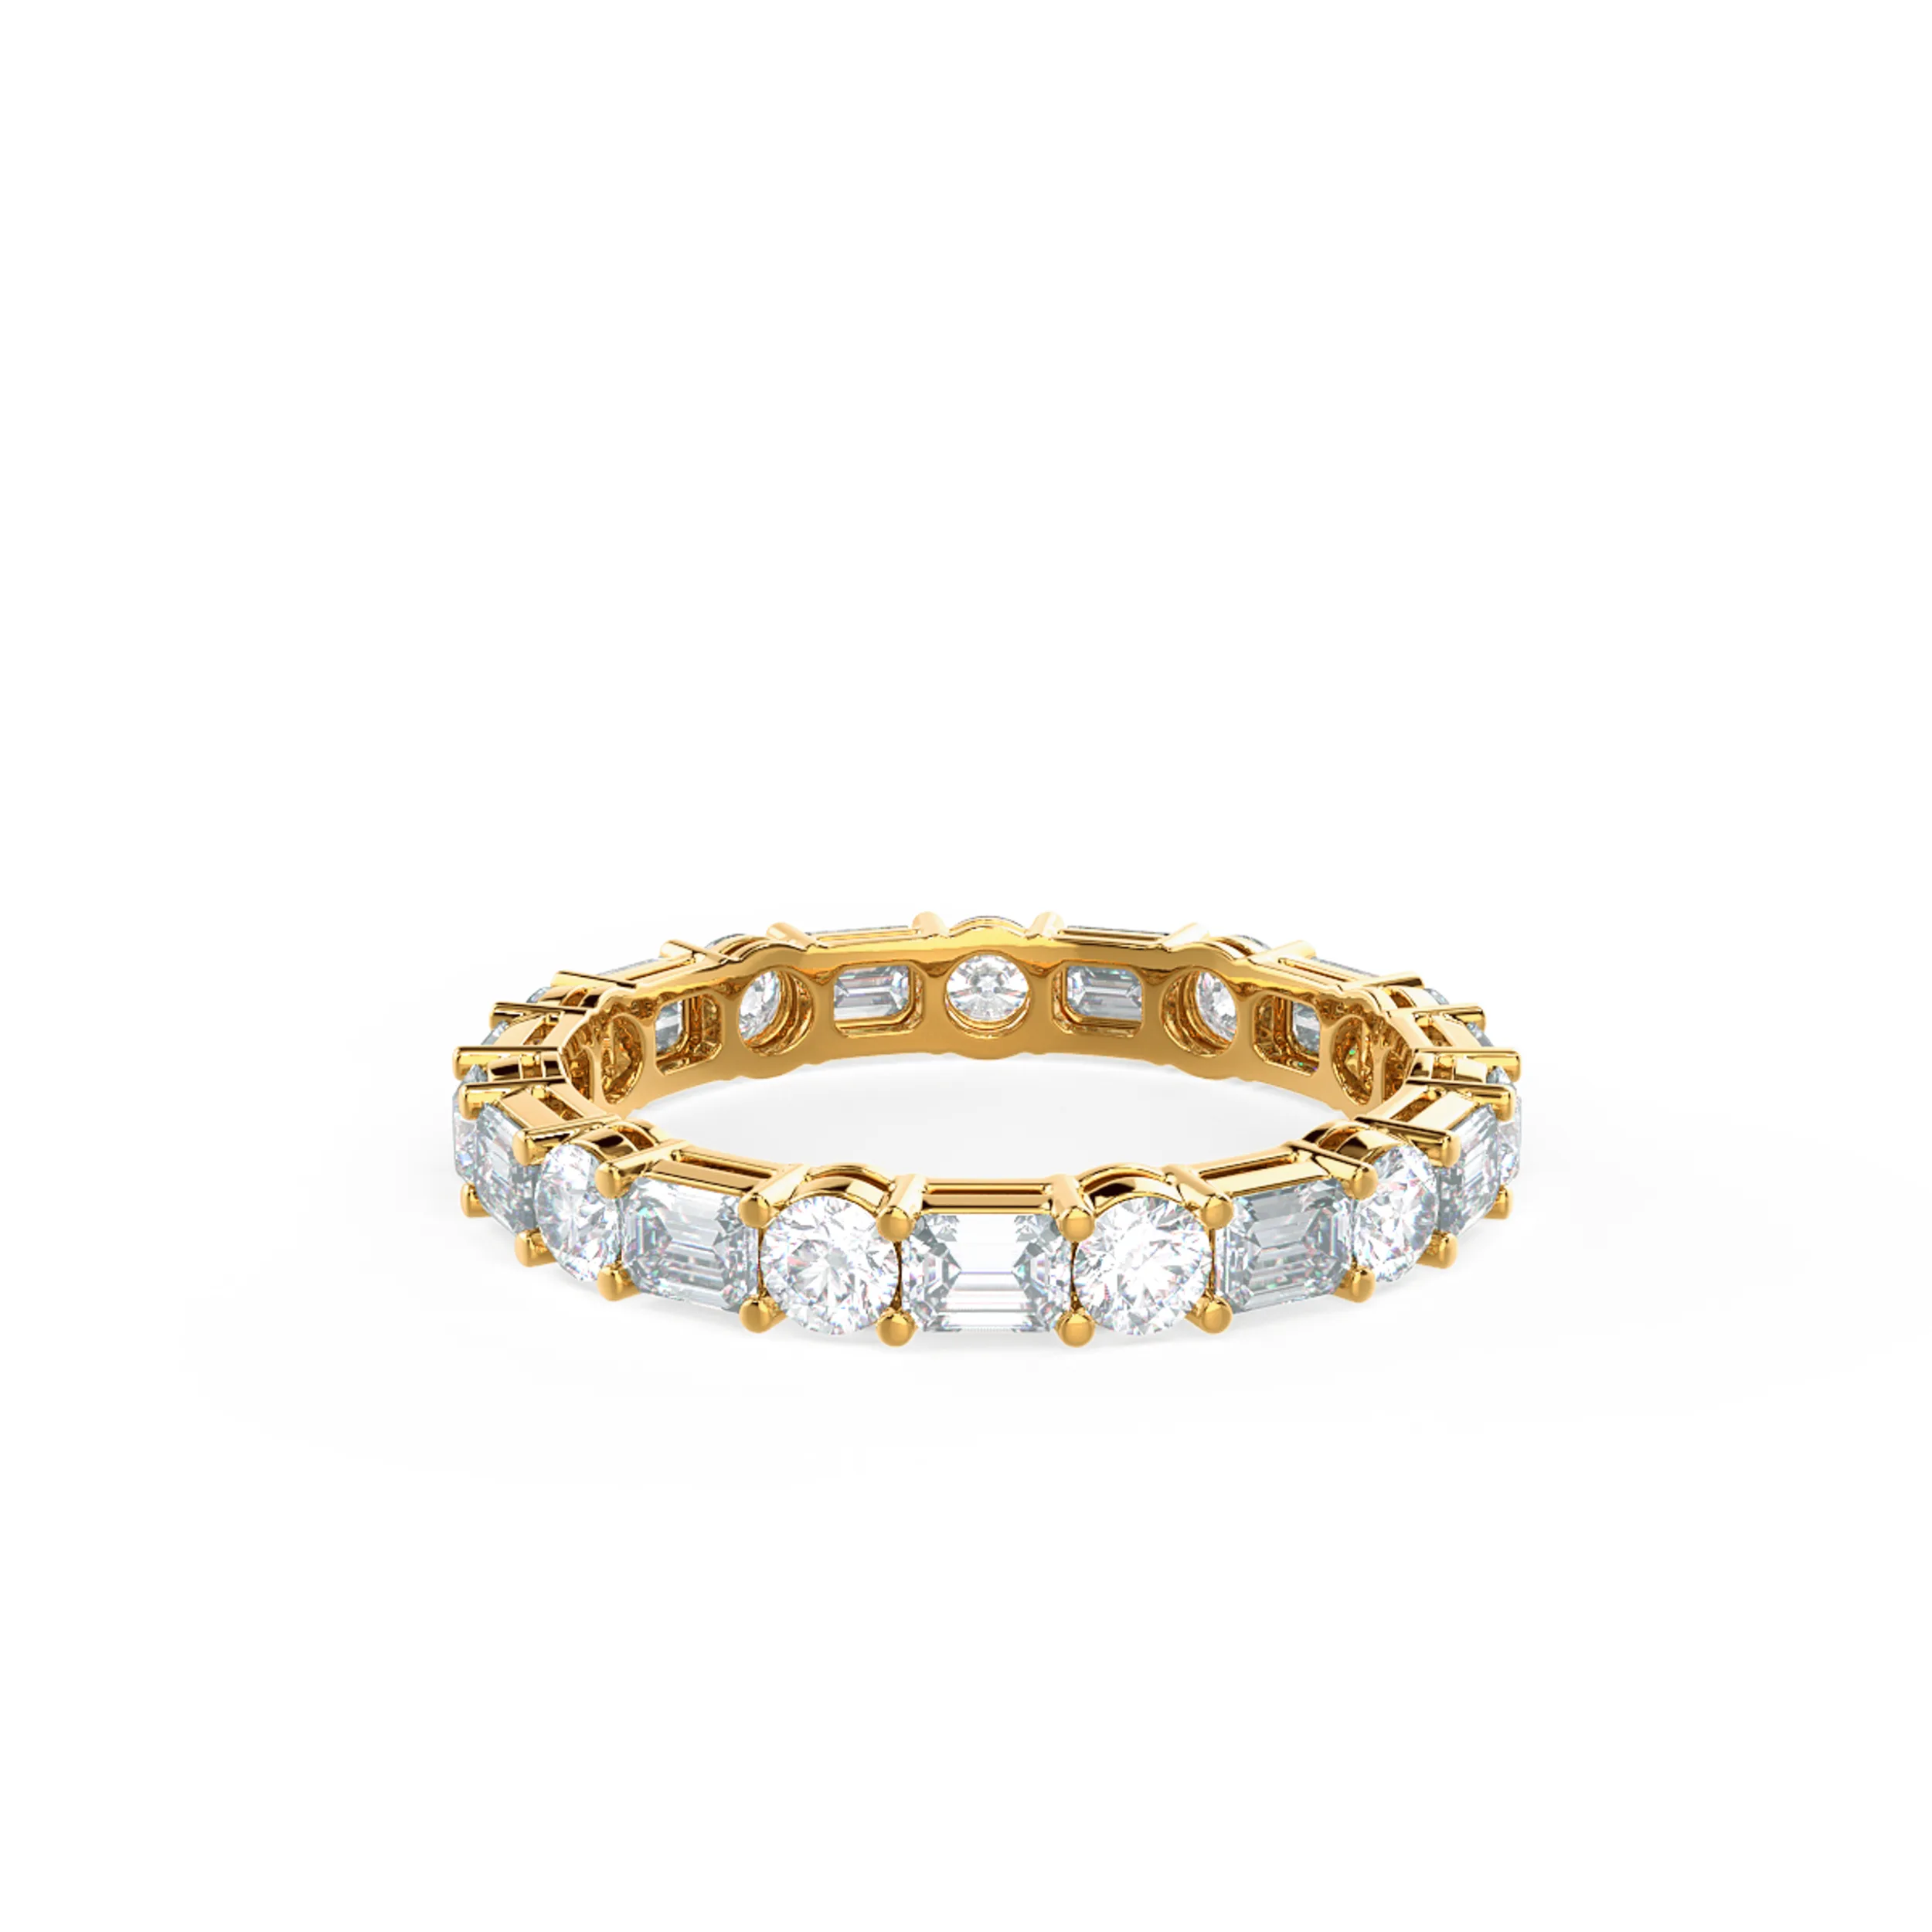 2.5 ct Lab Diamonds set in 18kt Yellow Gold Emerald and Round East-West Eternity Band (Main View)